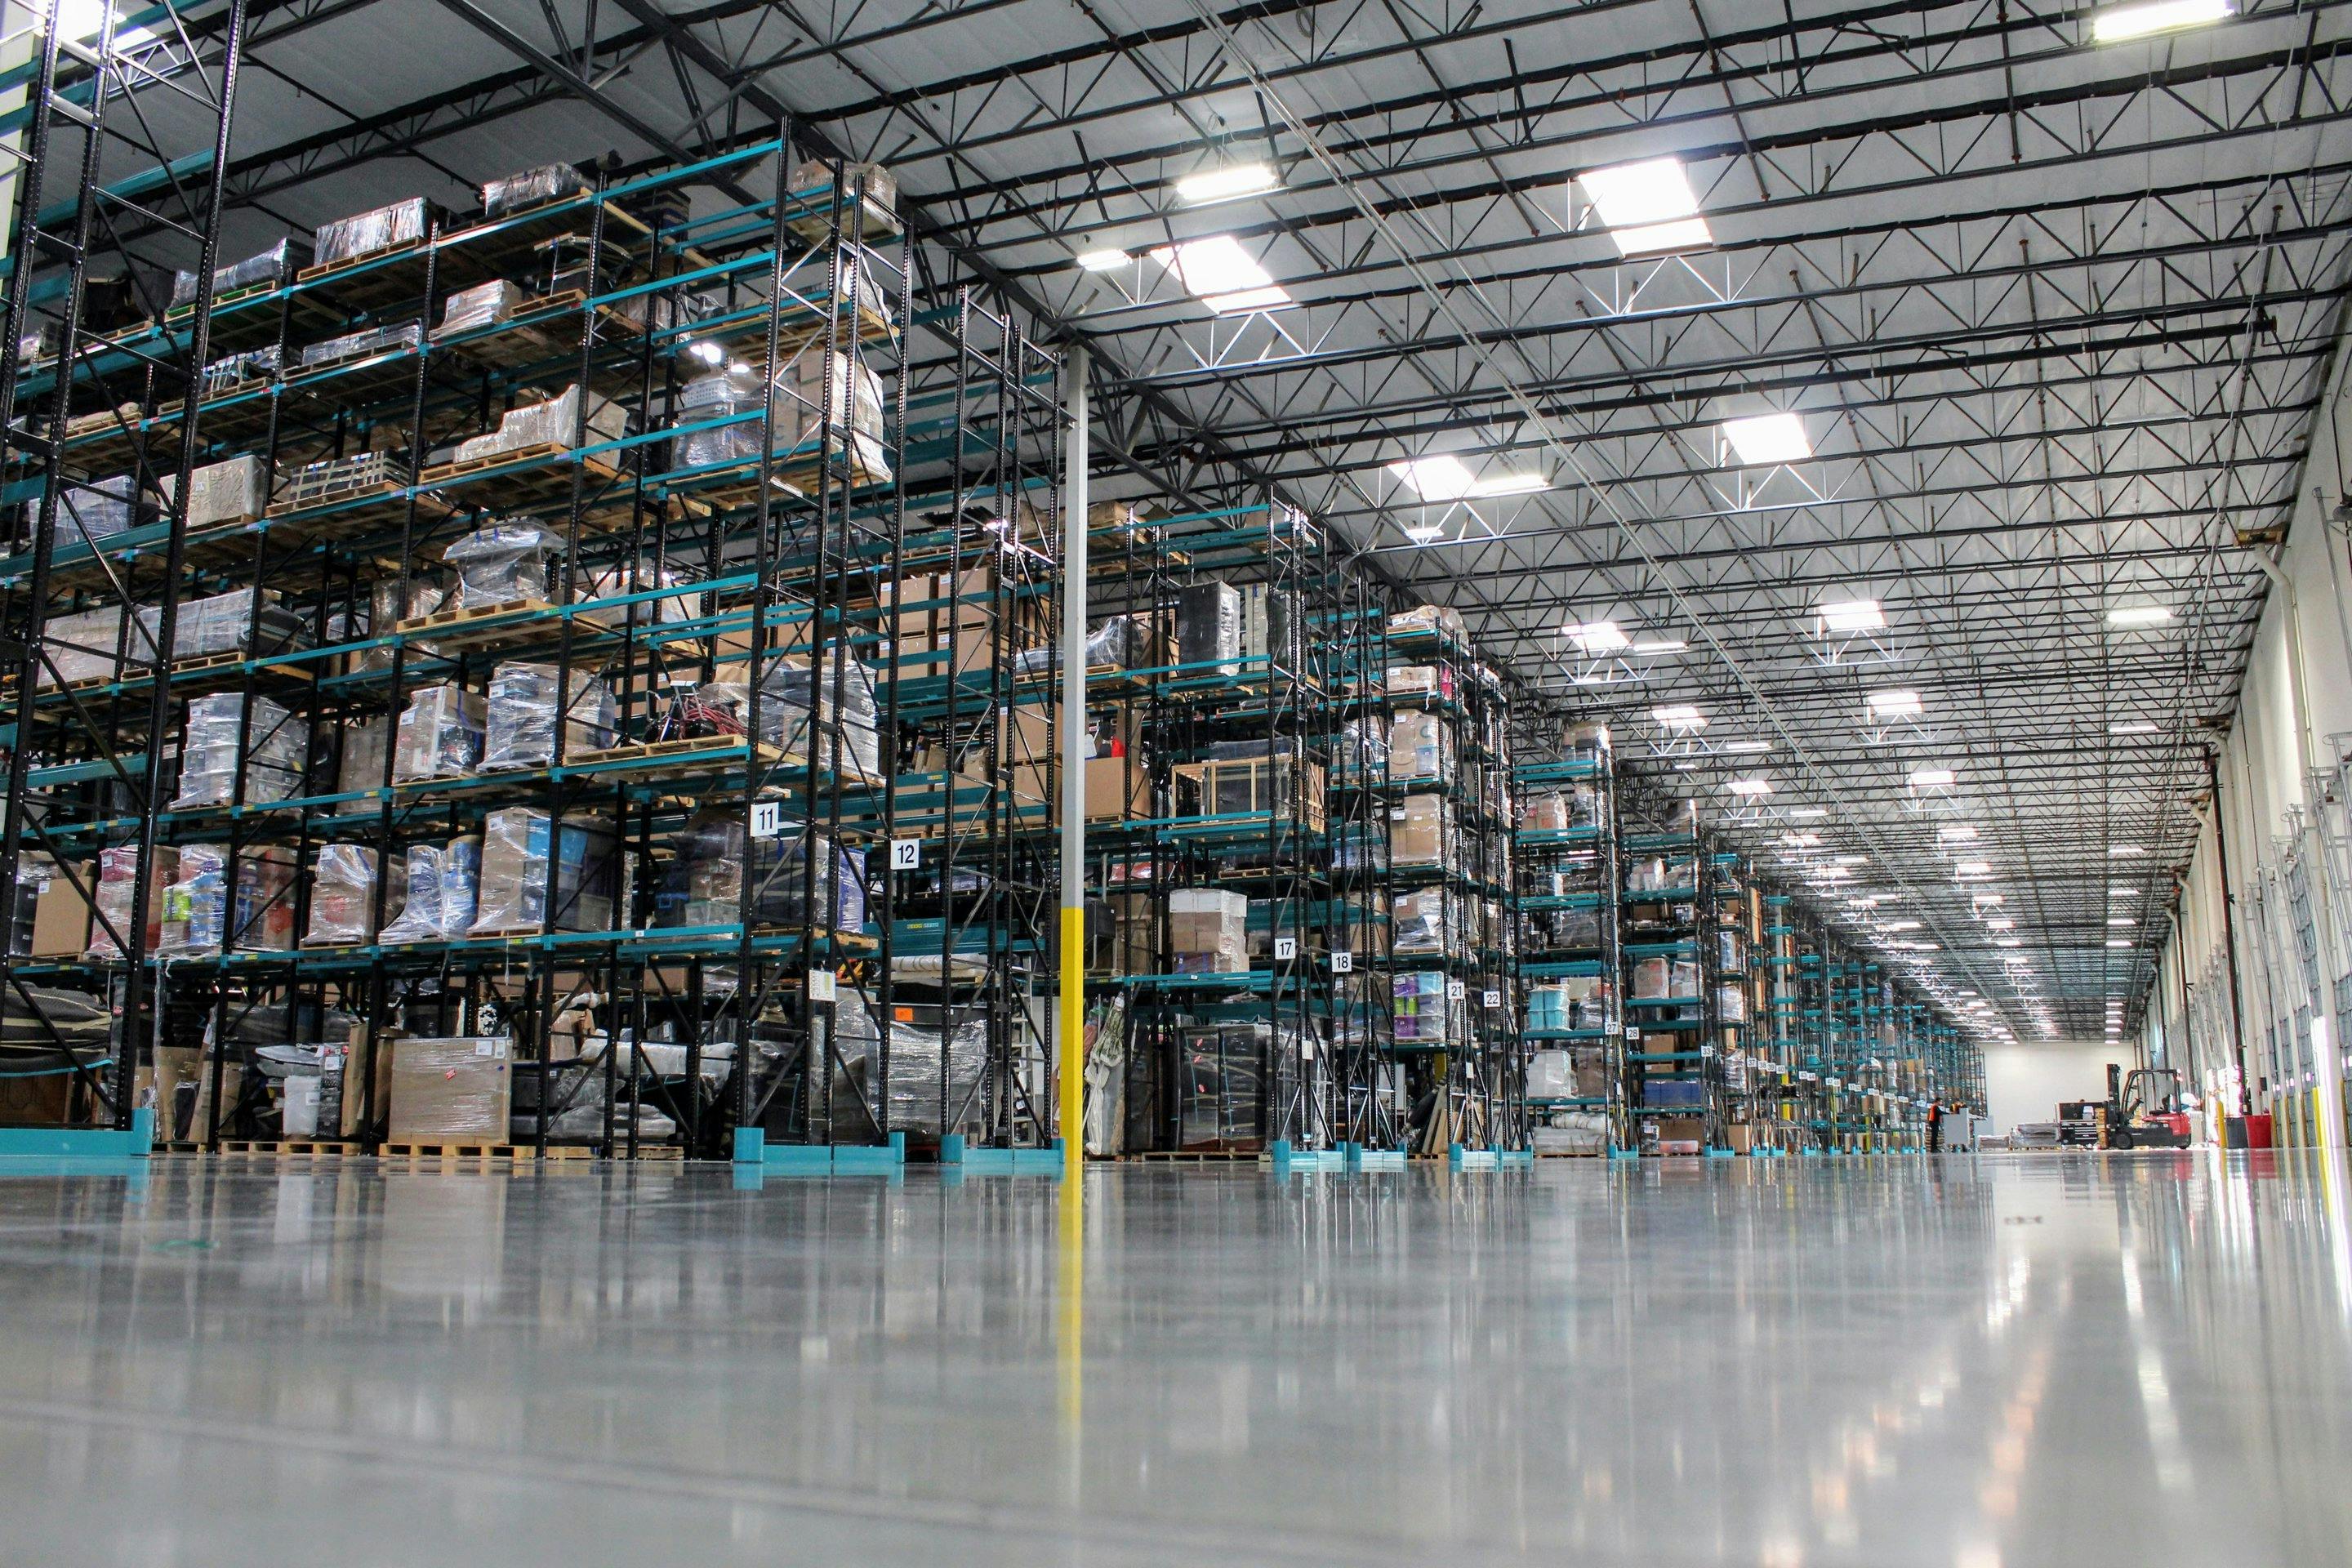 Clutter’s pristine warehouse, with large teal racks filled with neatly organized belongings